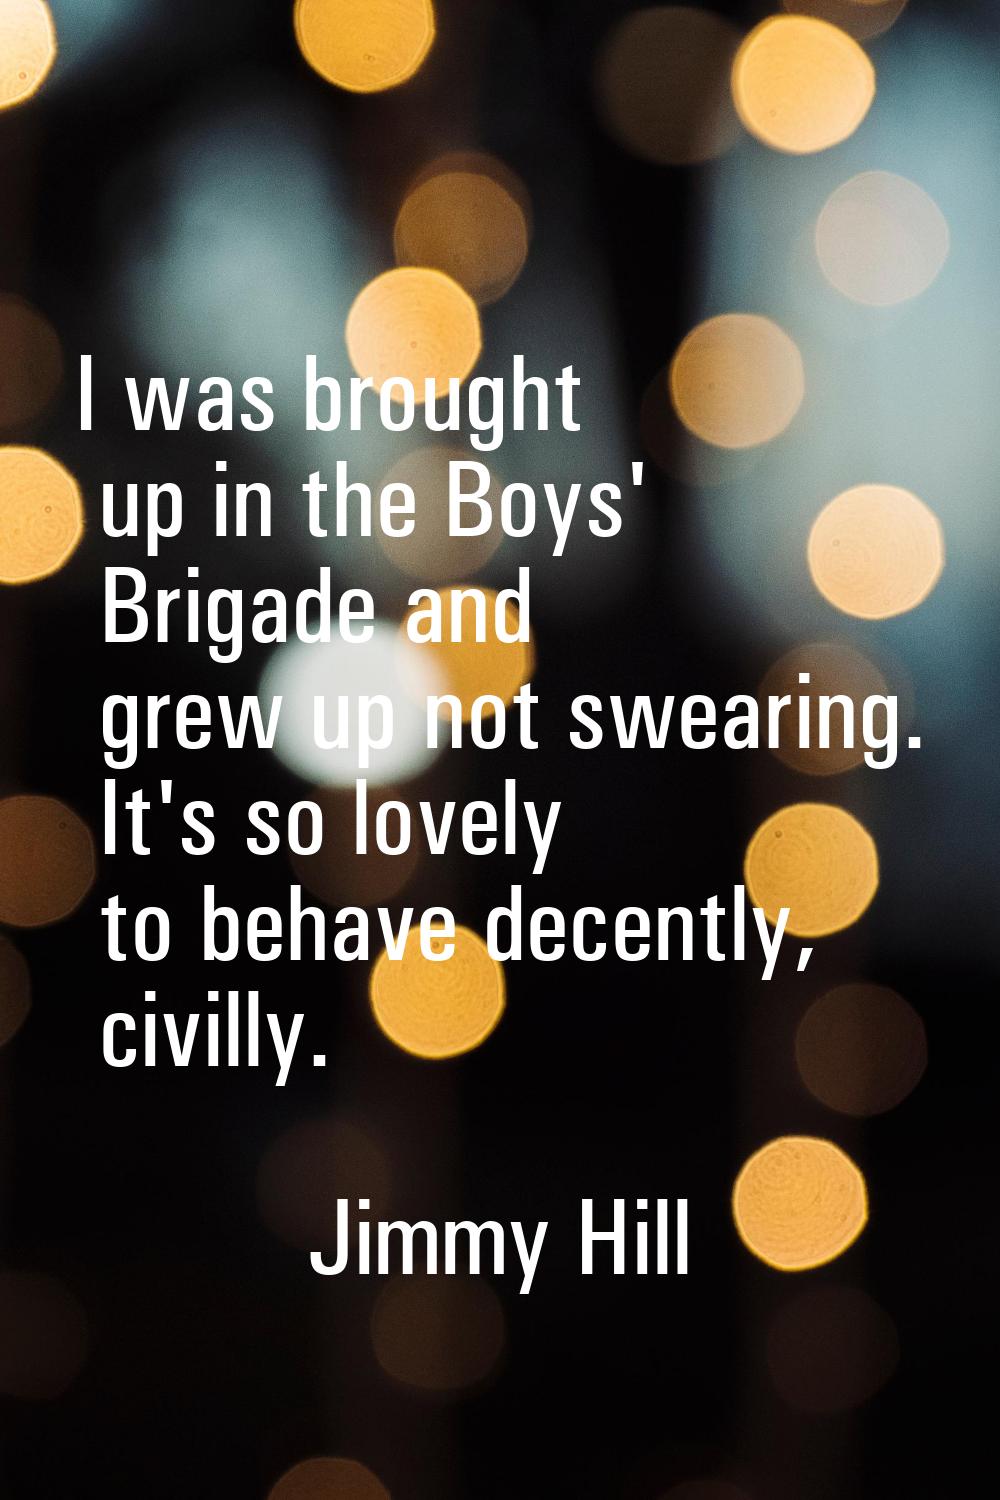 I was brought up in the Boys' Brigade and grew up not swearing. It's so lovely to behave decently, 